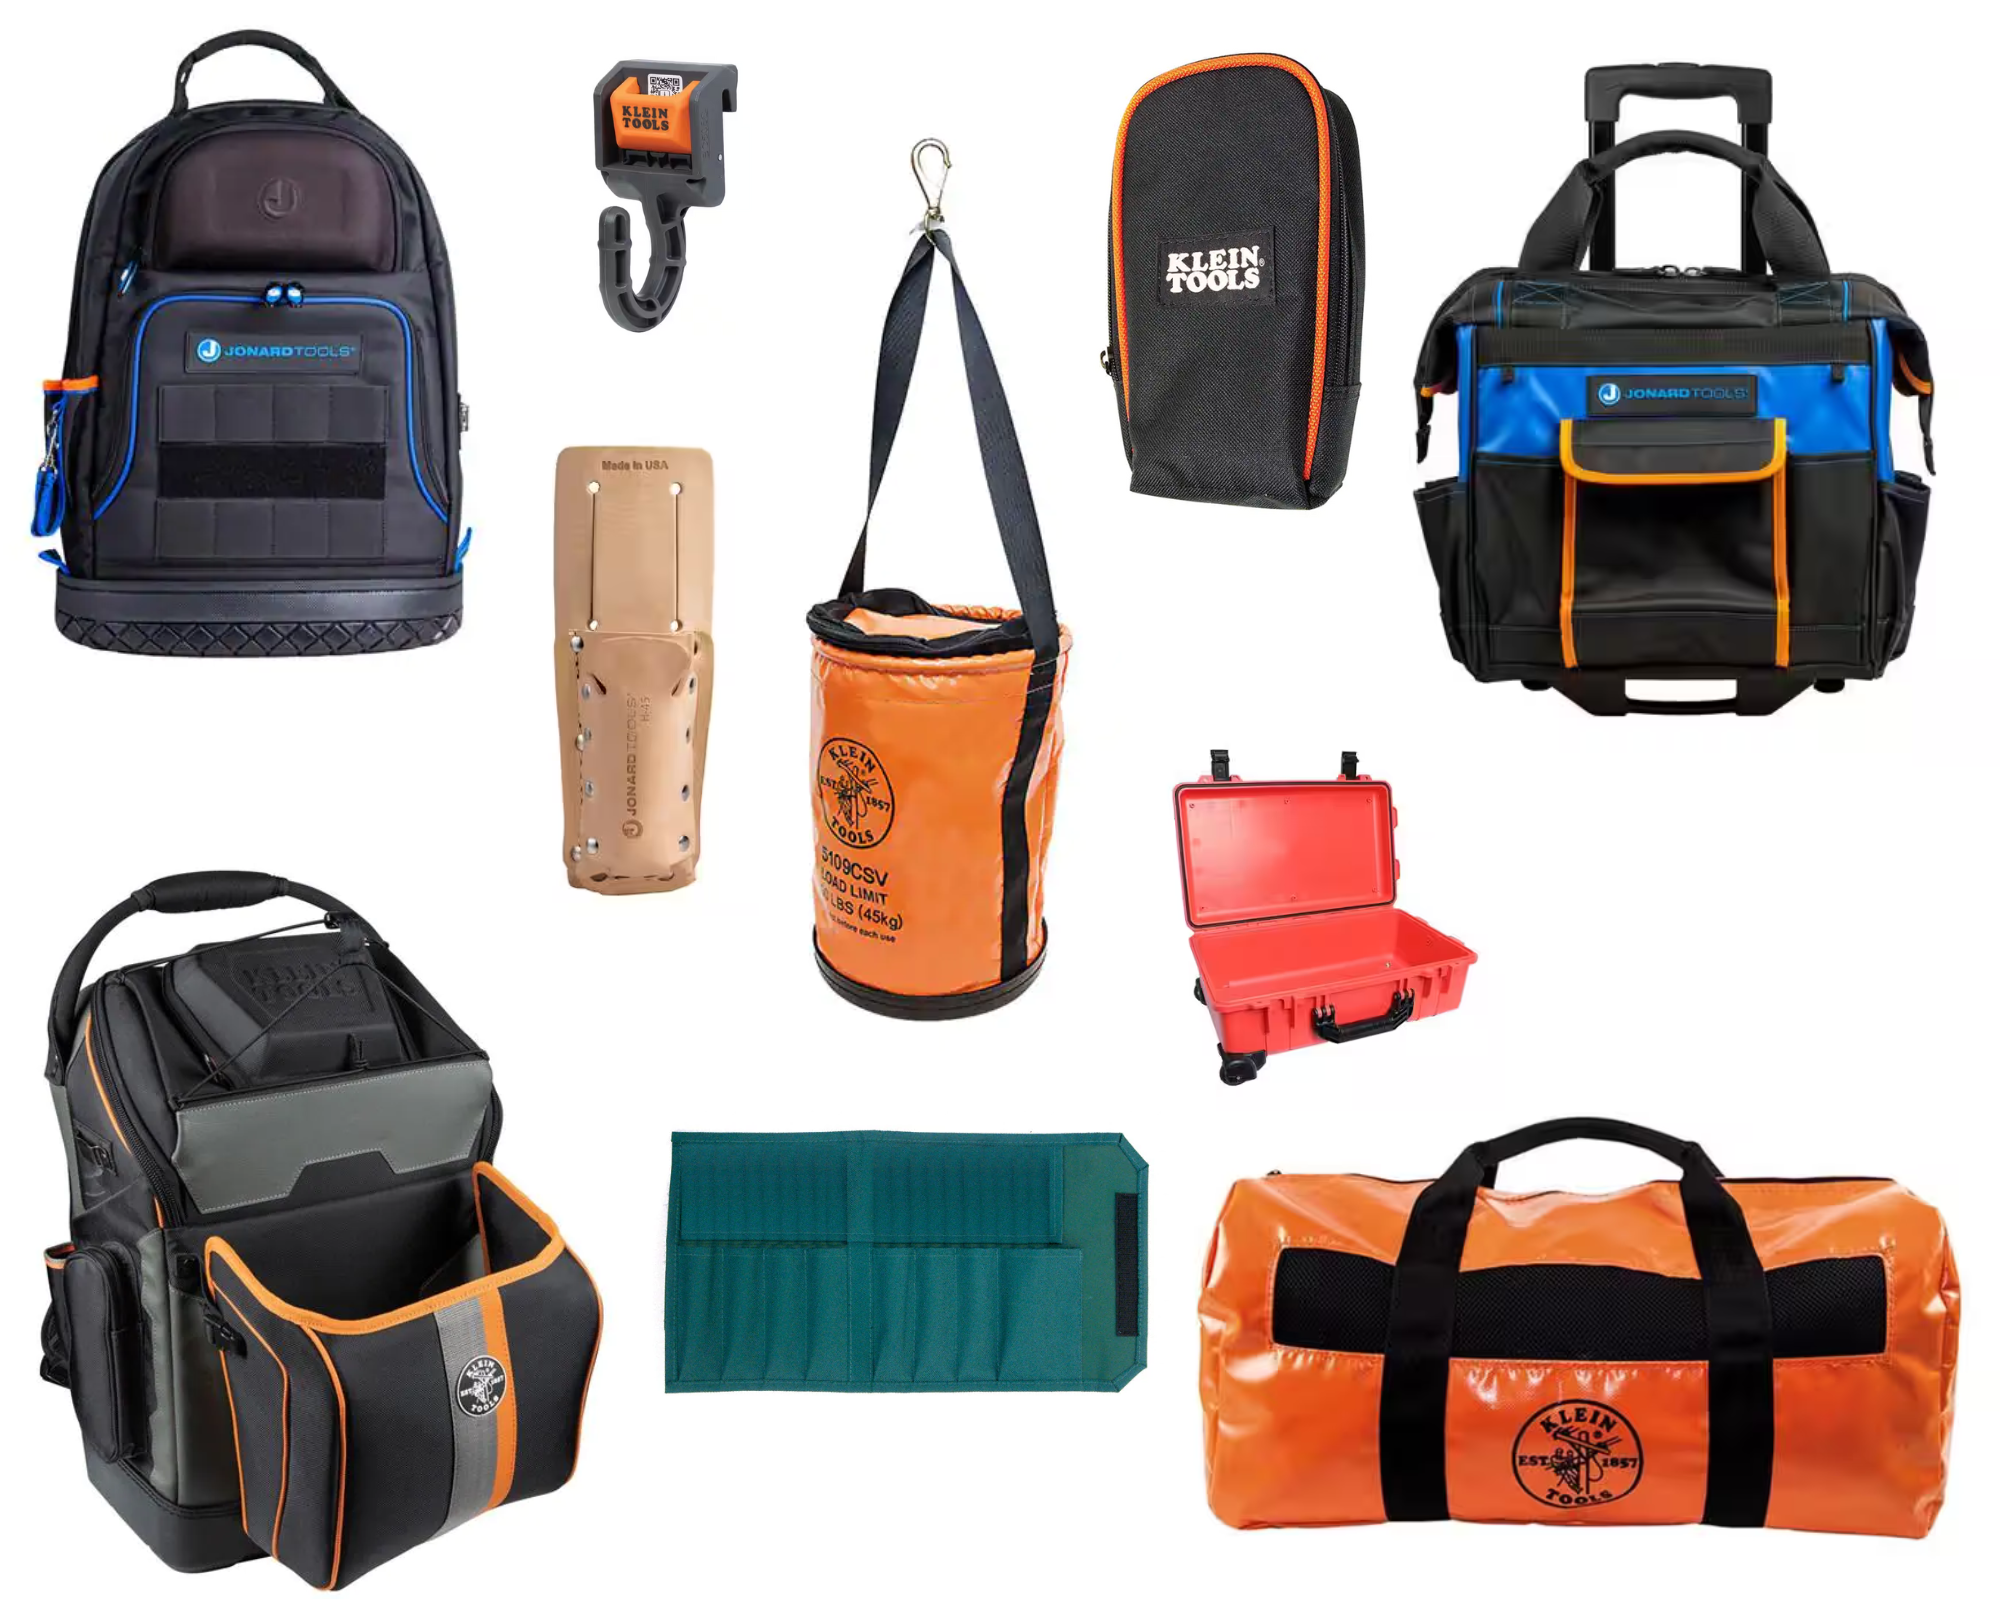 Tool bags, Cabinets and Boxes